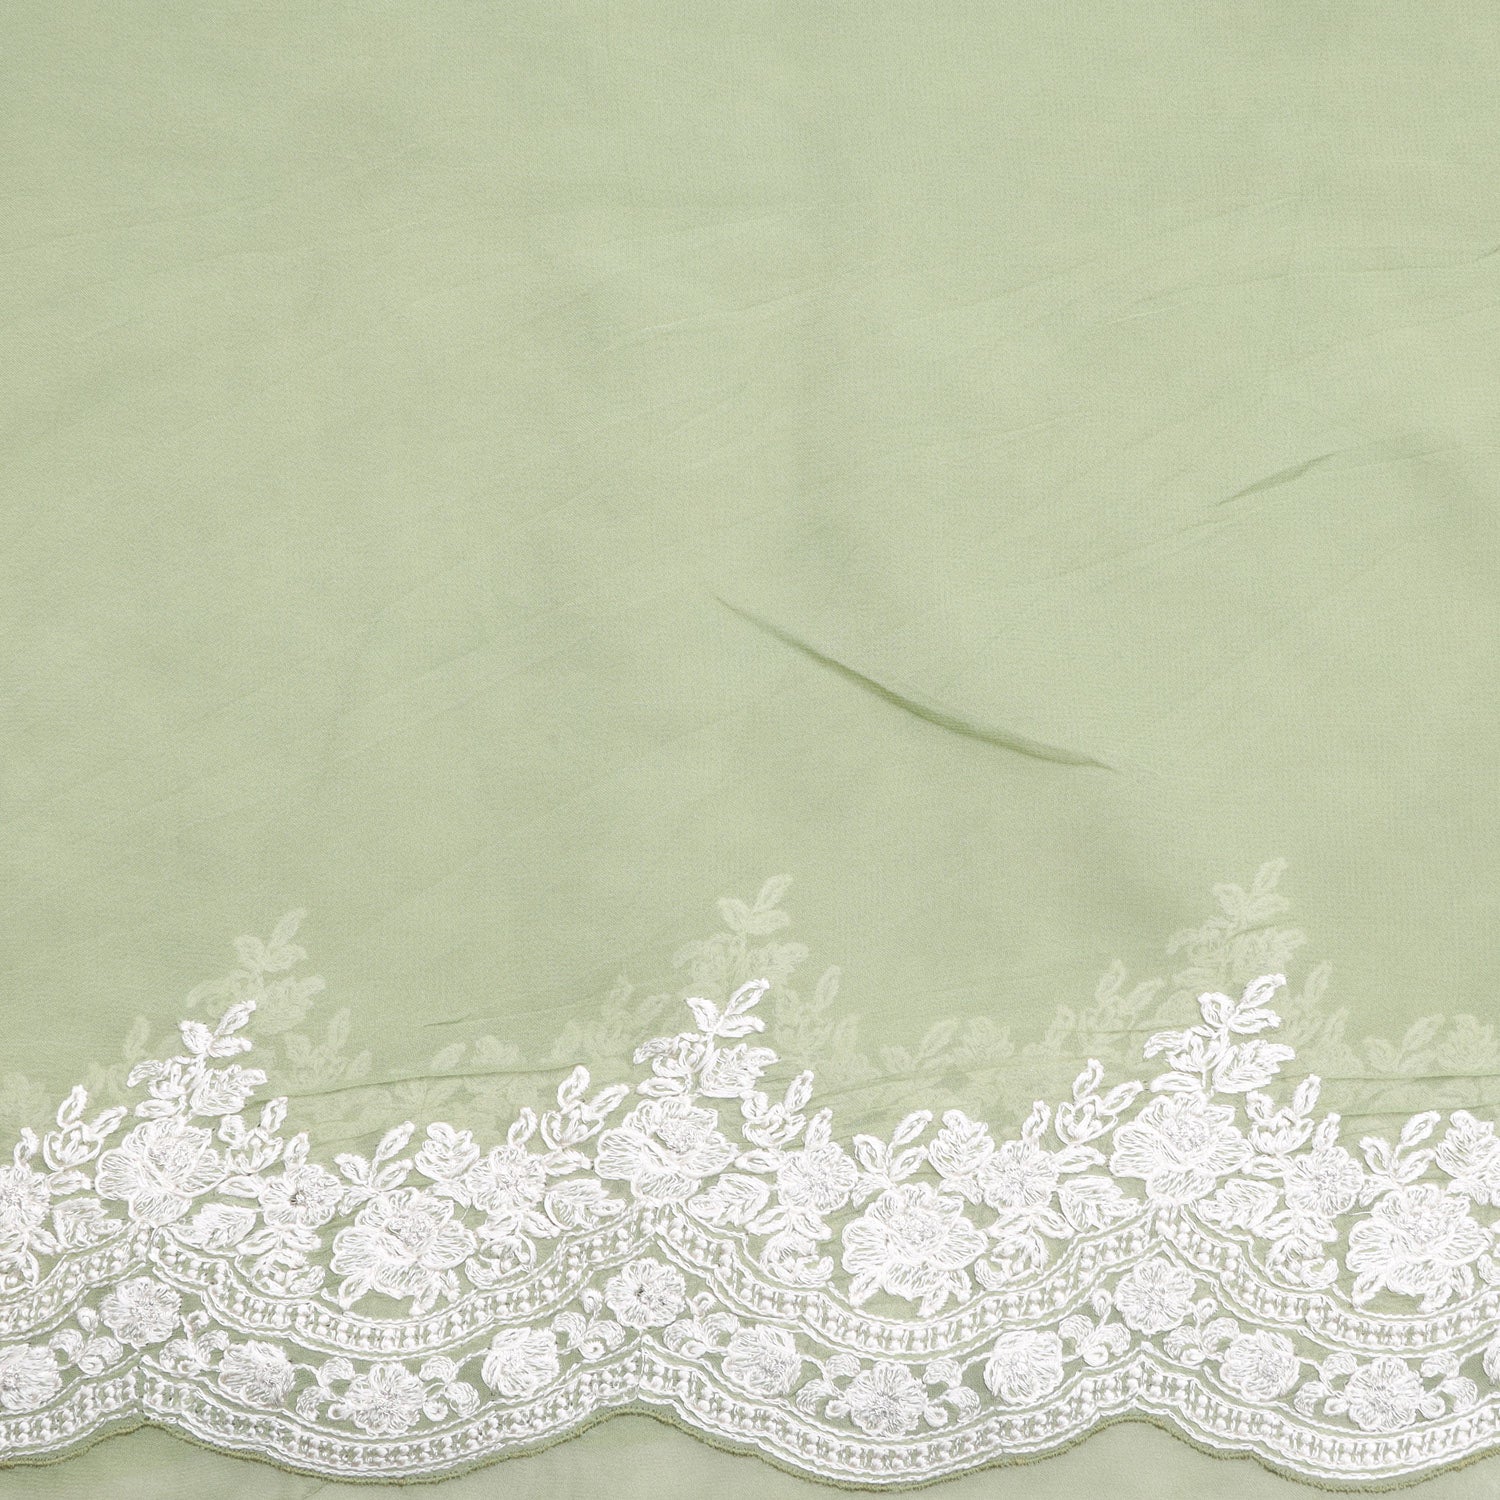 Mint Green Georgette Saree With Floral Embroidery Pattern - Singhania's